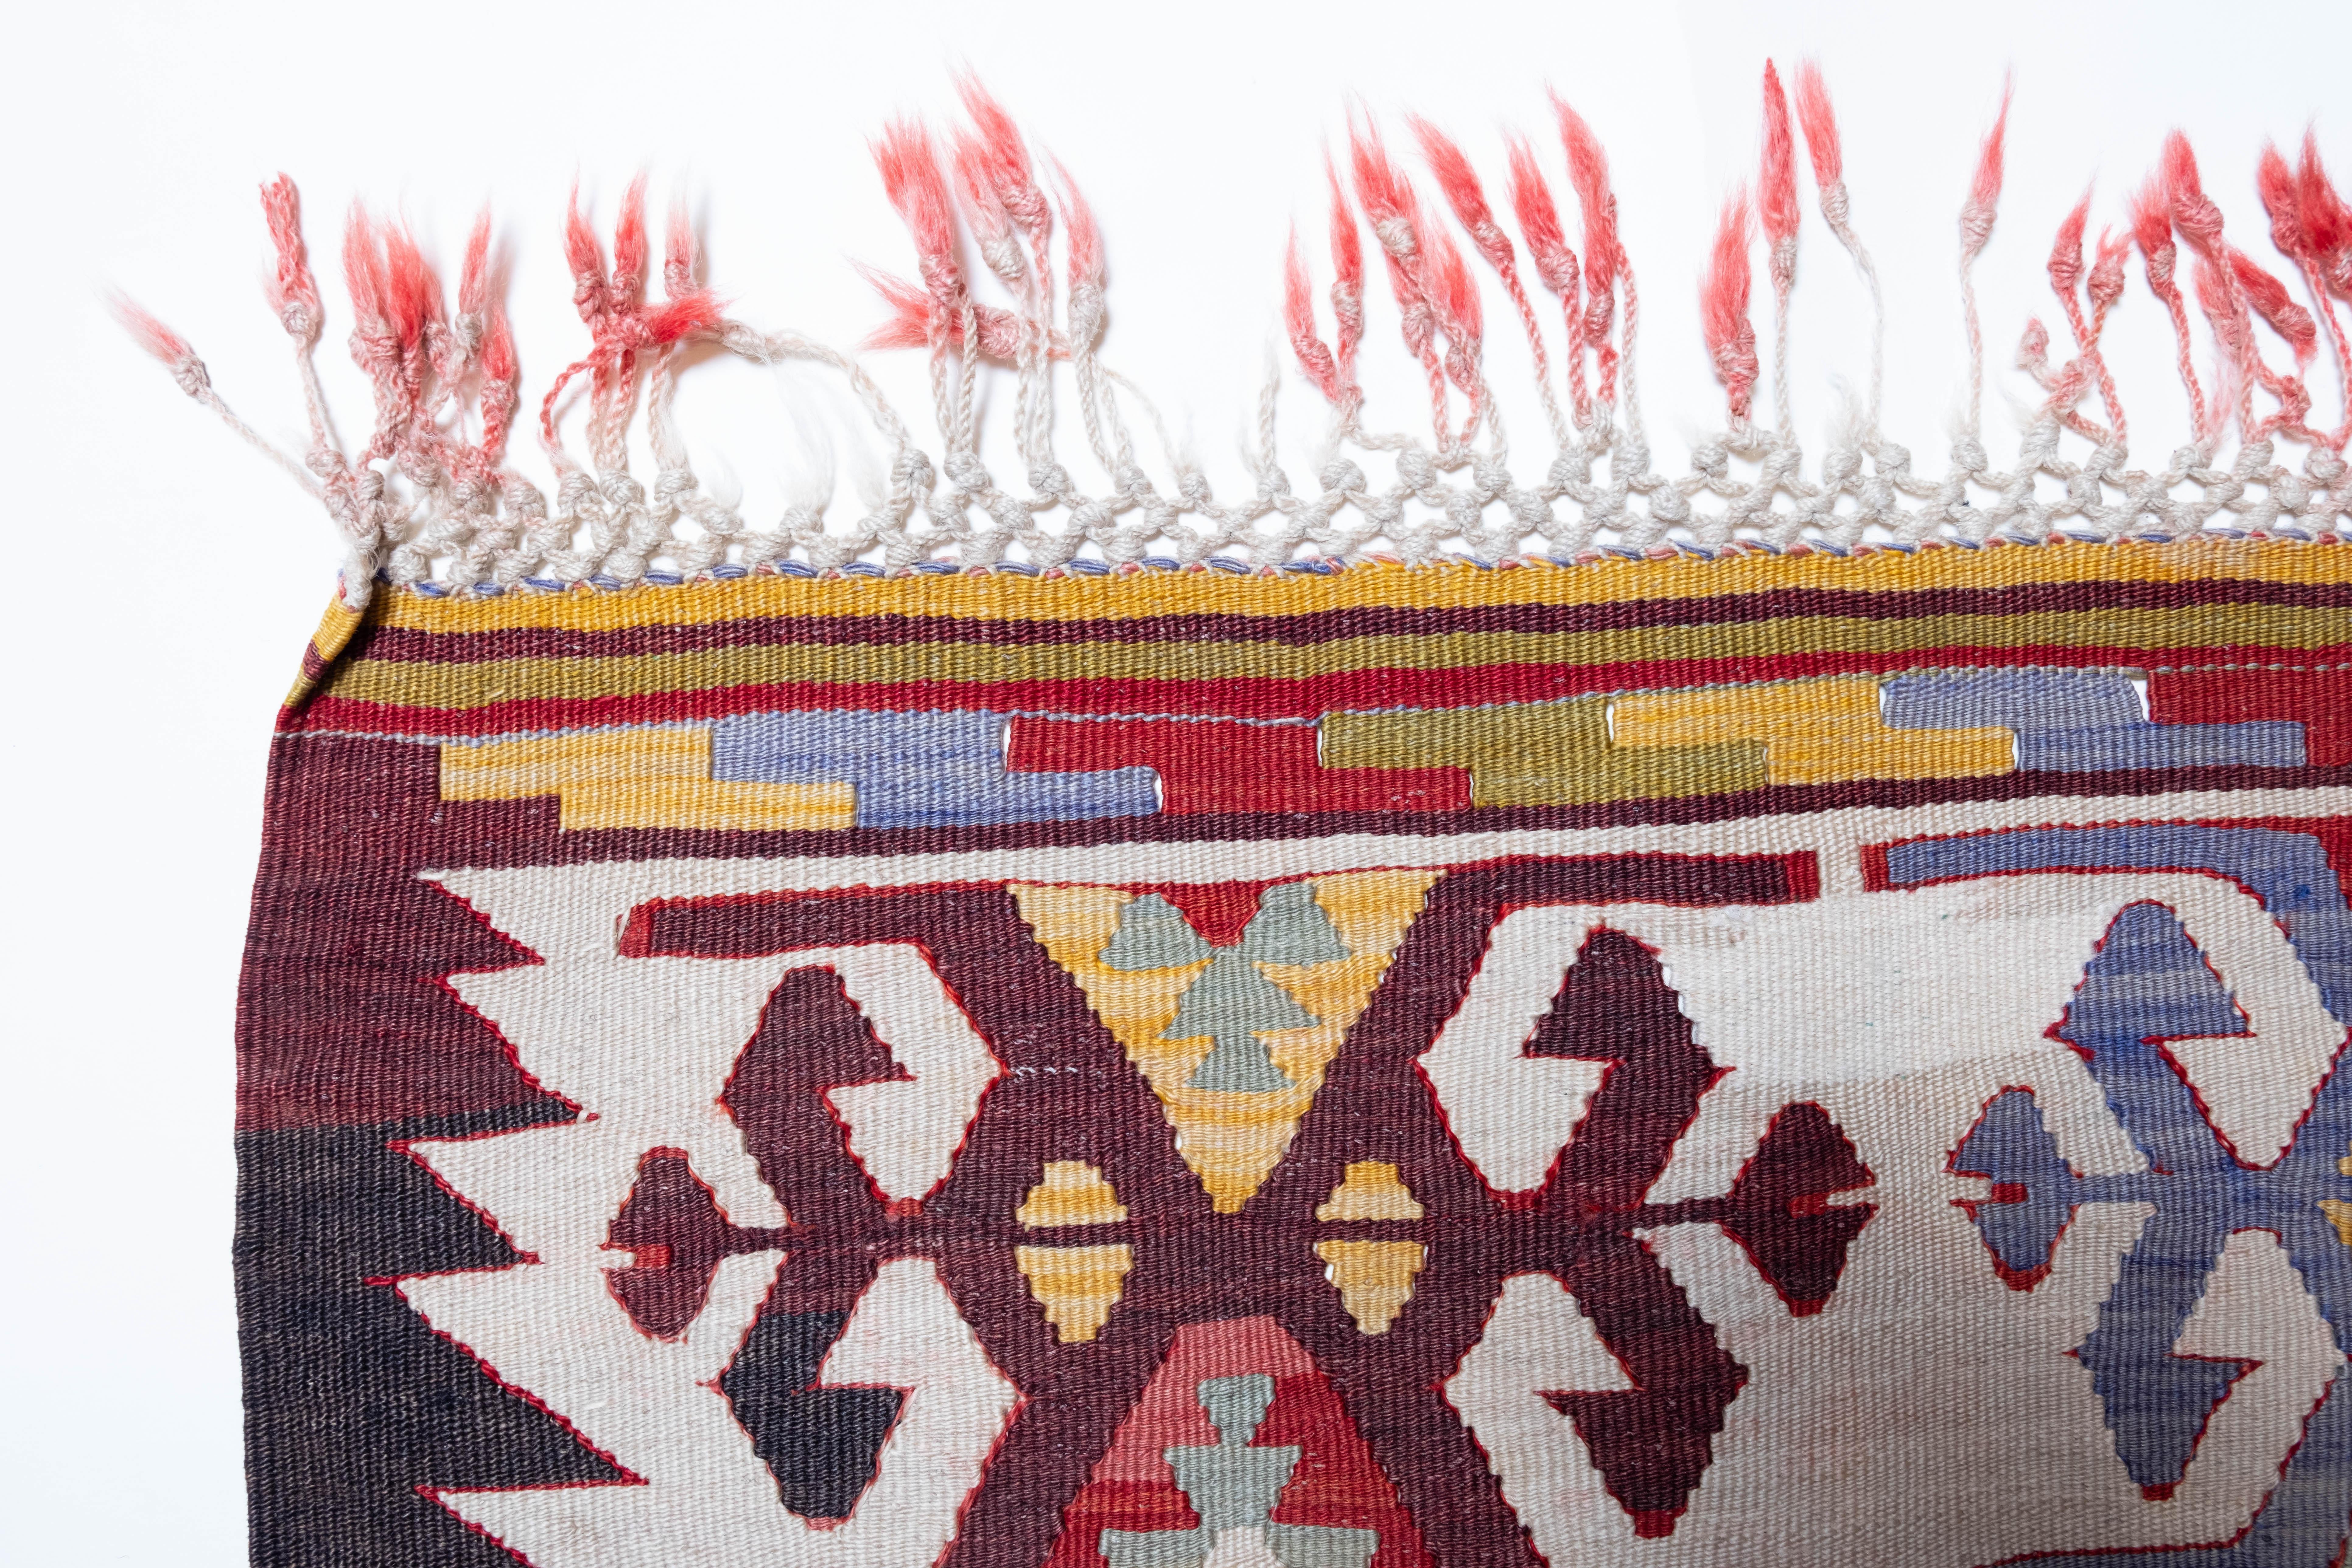 This is Western Anatolian Antique Kilim from the Aydin region with a rare and beautiful color composition.

This highly collectible antique kilim has wonderful special colors and textures that are typical of an old kilim in good condition. It is a